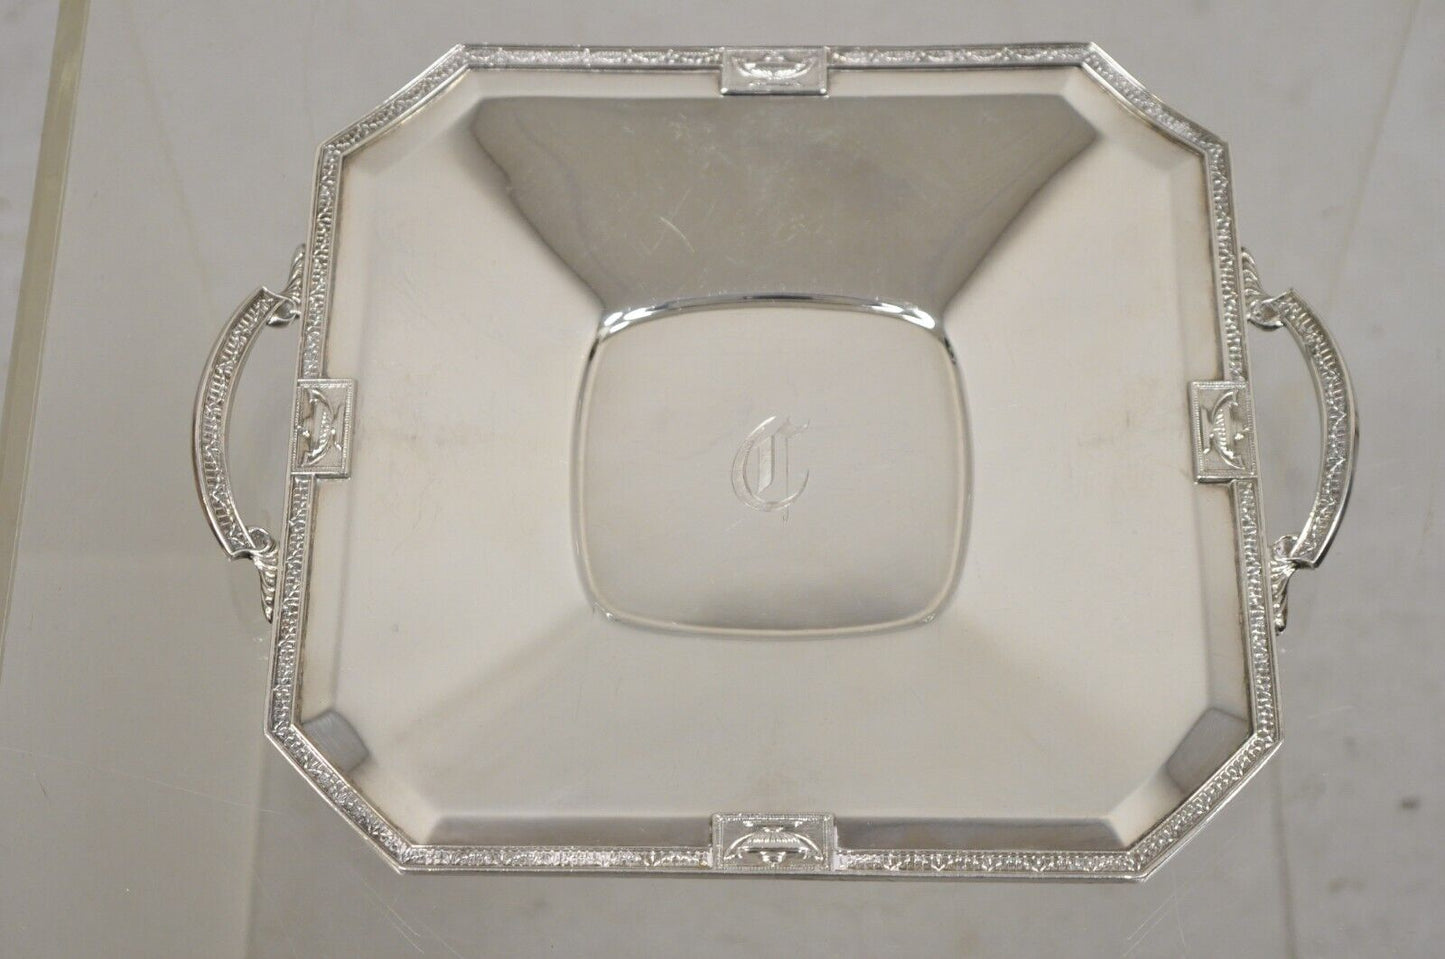 Antique LBS Co English Edwardian Silver Plated Square Platter Tray "C" Monogram